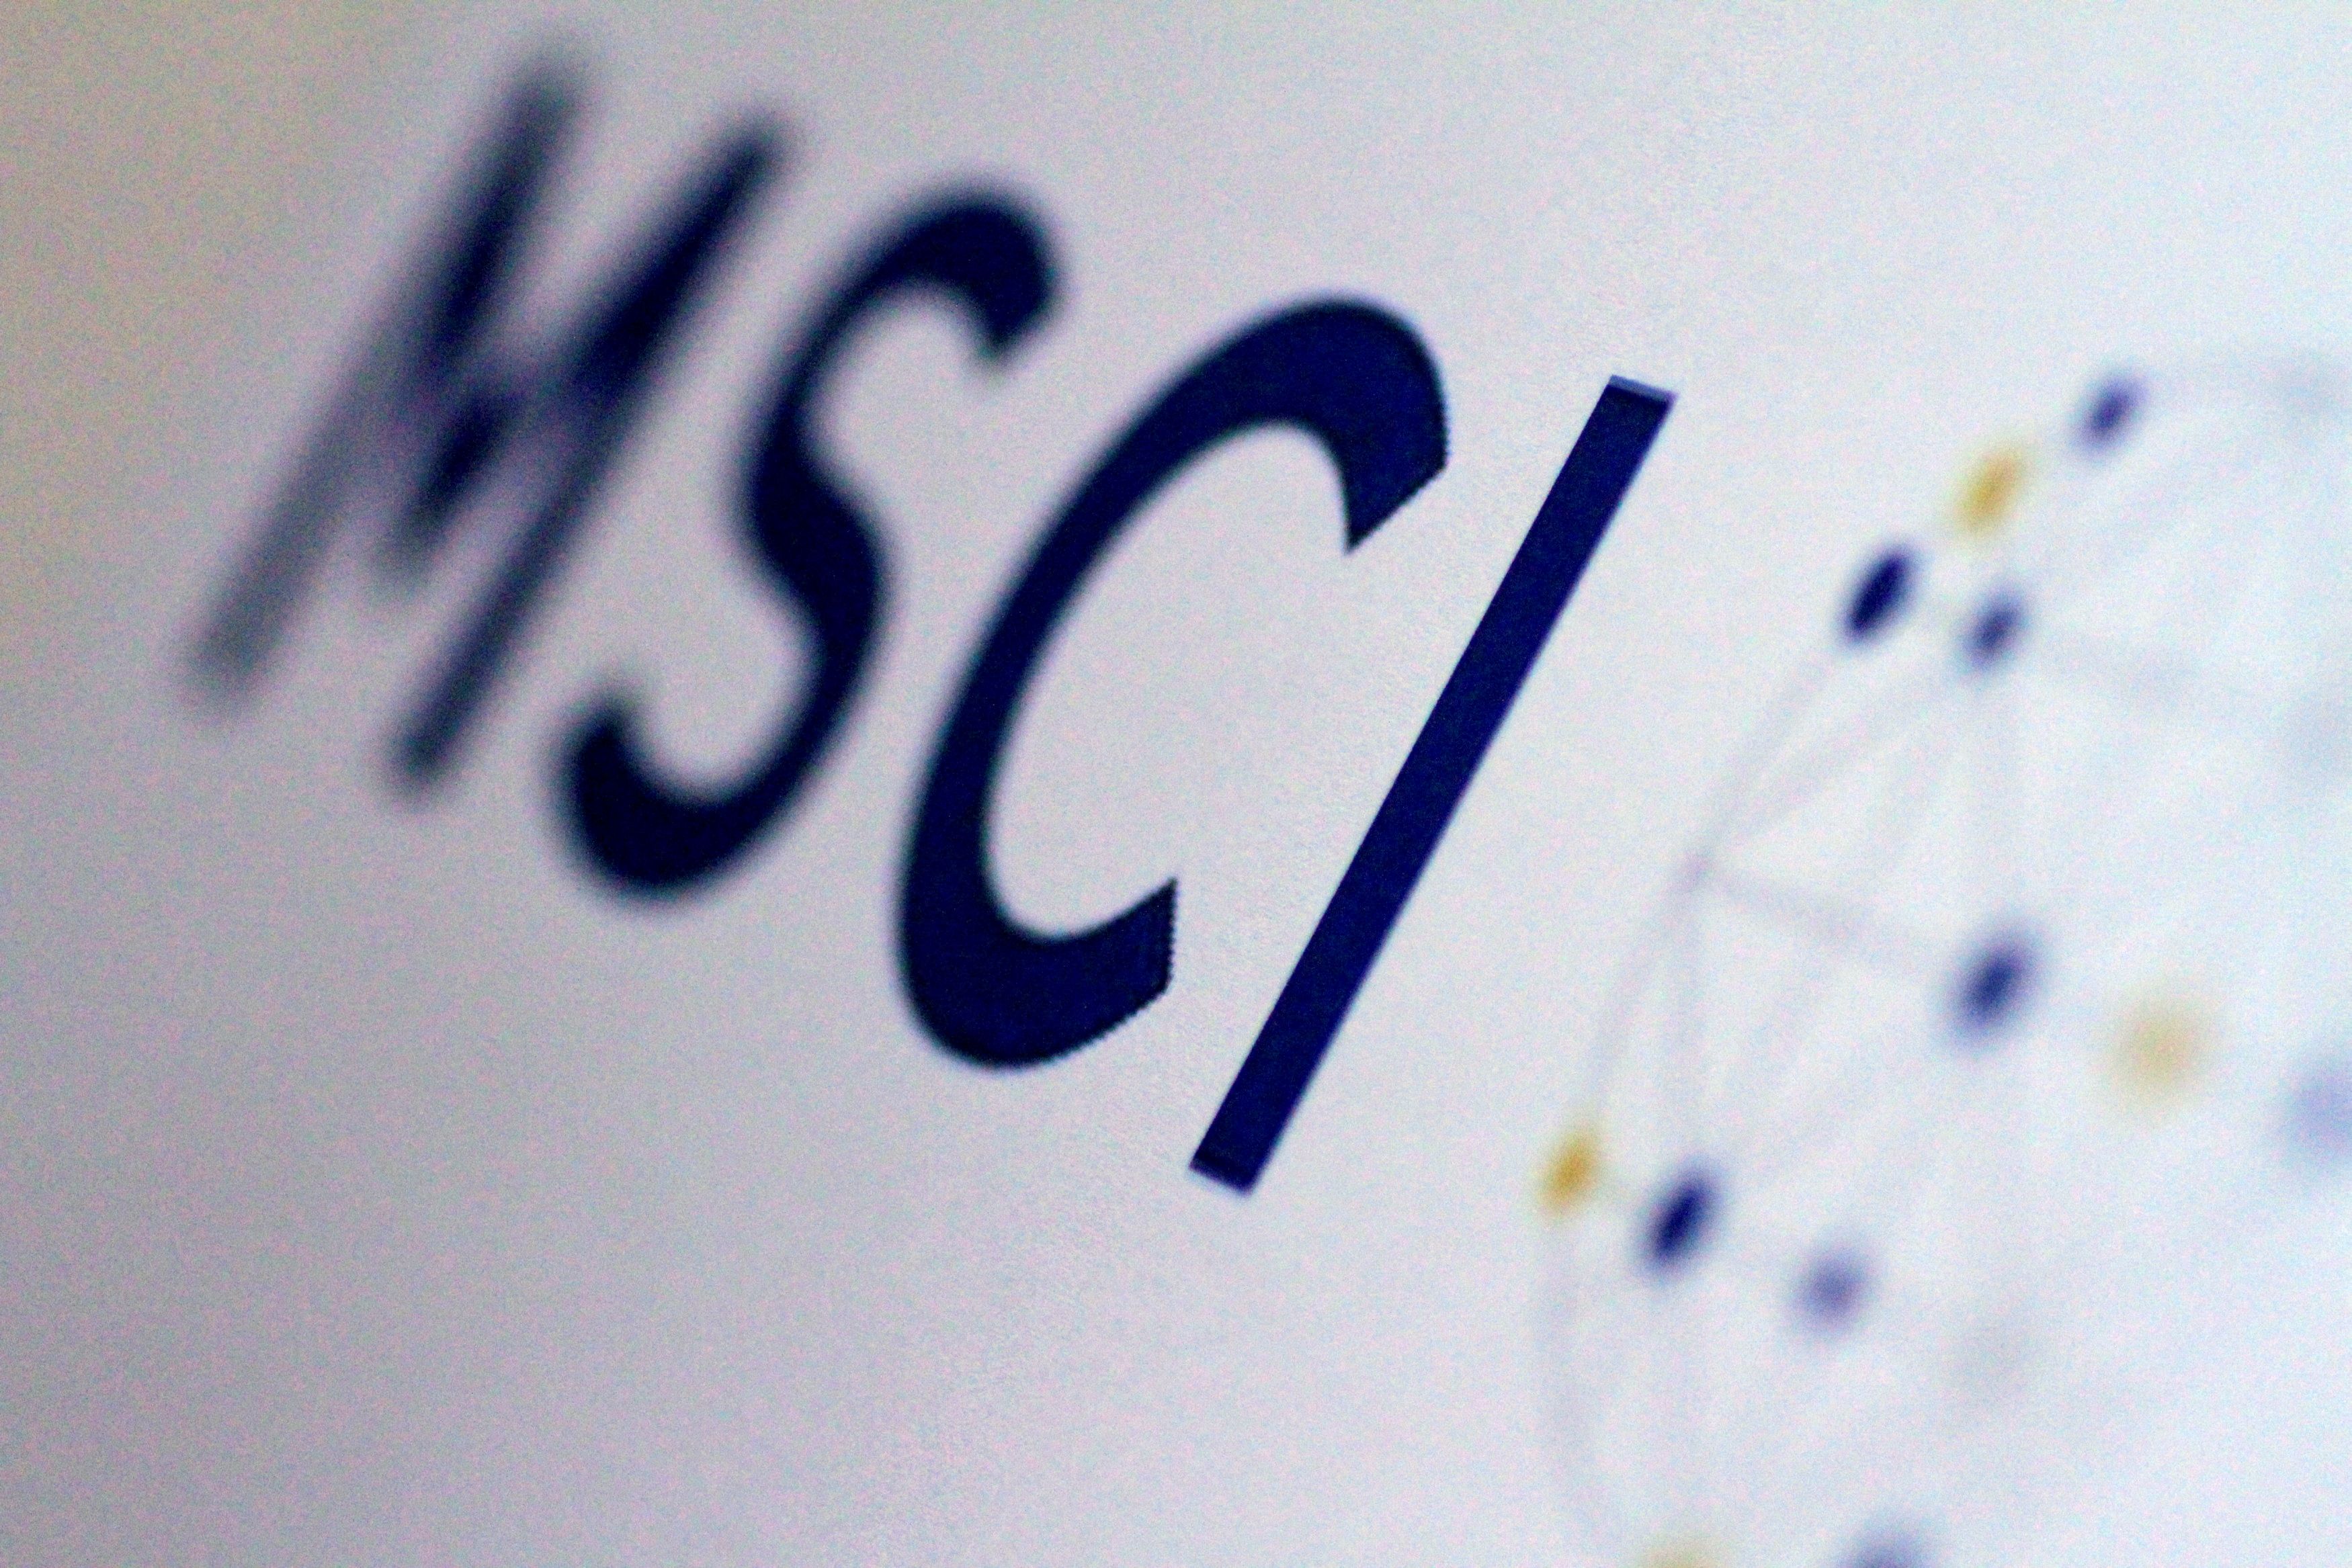 The MSCI logo is seen in this June 20, 2017 illustration photo. REUTERS/Thomas White